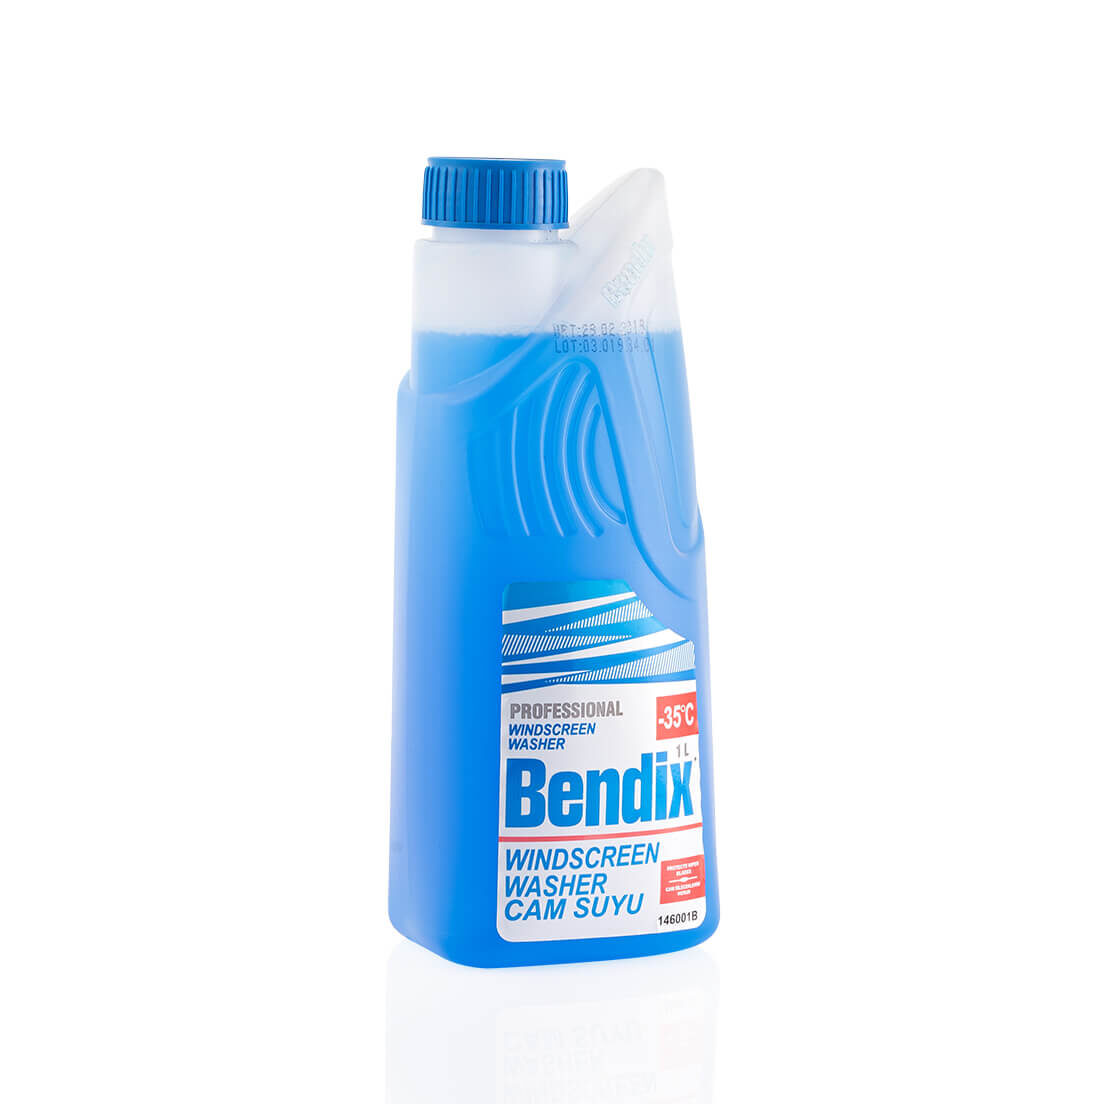 (English) <h2>Bendix WindScreen Washer</h2> Bendix Windscreen Washer Product Advantages: <ul> <li>Long-term protection against pollution.</li> <li>Excellent cleaning effect.</li> <li>Increased driving safety.</li> <li>Provides clear vision in seconds.</li> <li>Removes insects, oil and dirt.</li> </ul> Visit <a href="https://www.asistoto.com.tr/en/antifiriz/">Bendix Antifreeze Products Page</a> for full of products.